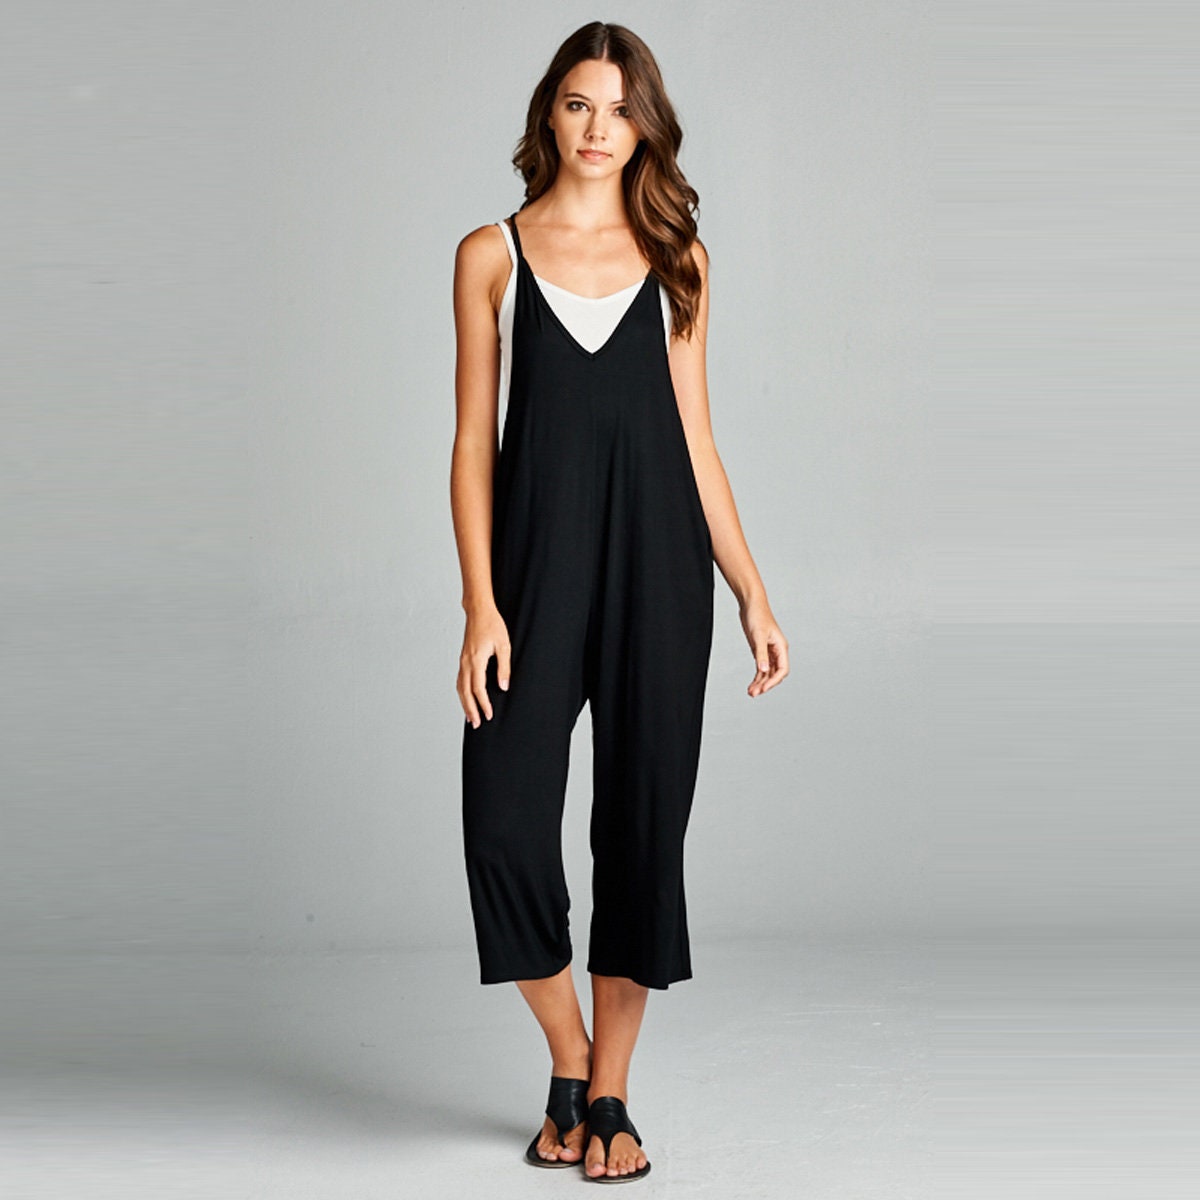 NECHOLOGY Womens Jumpsuits Dressy Casual Overalls Jumpsuits Loose